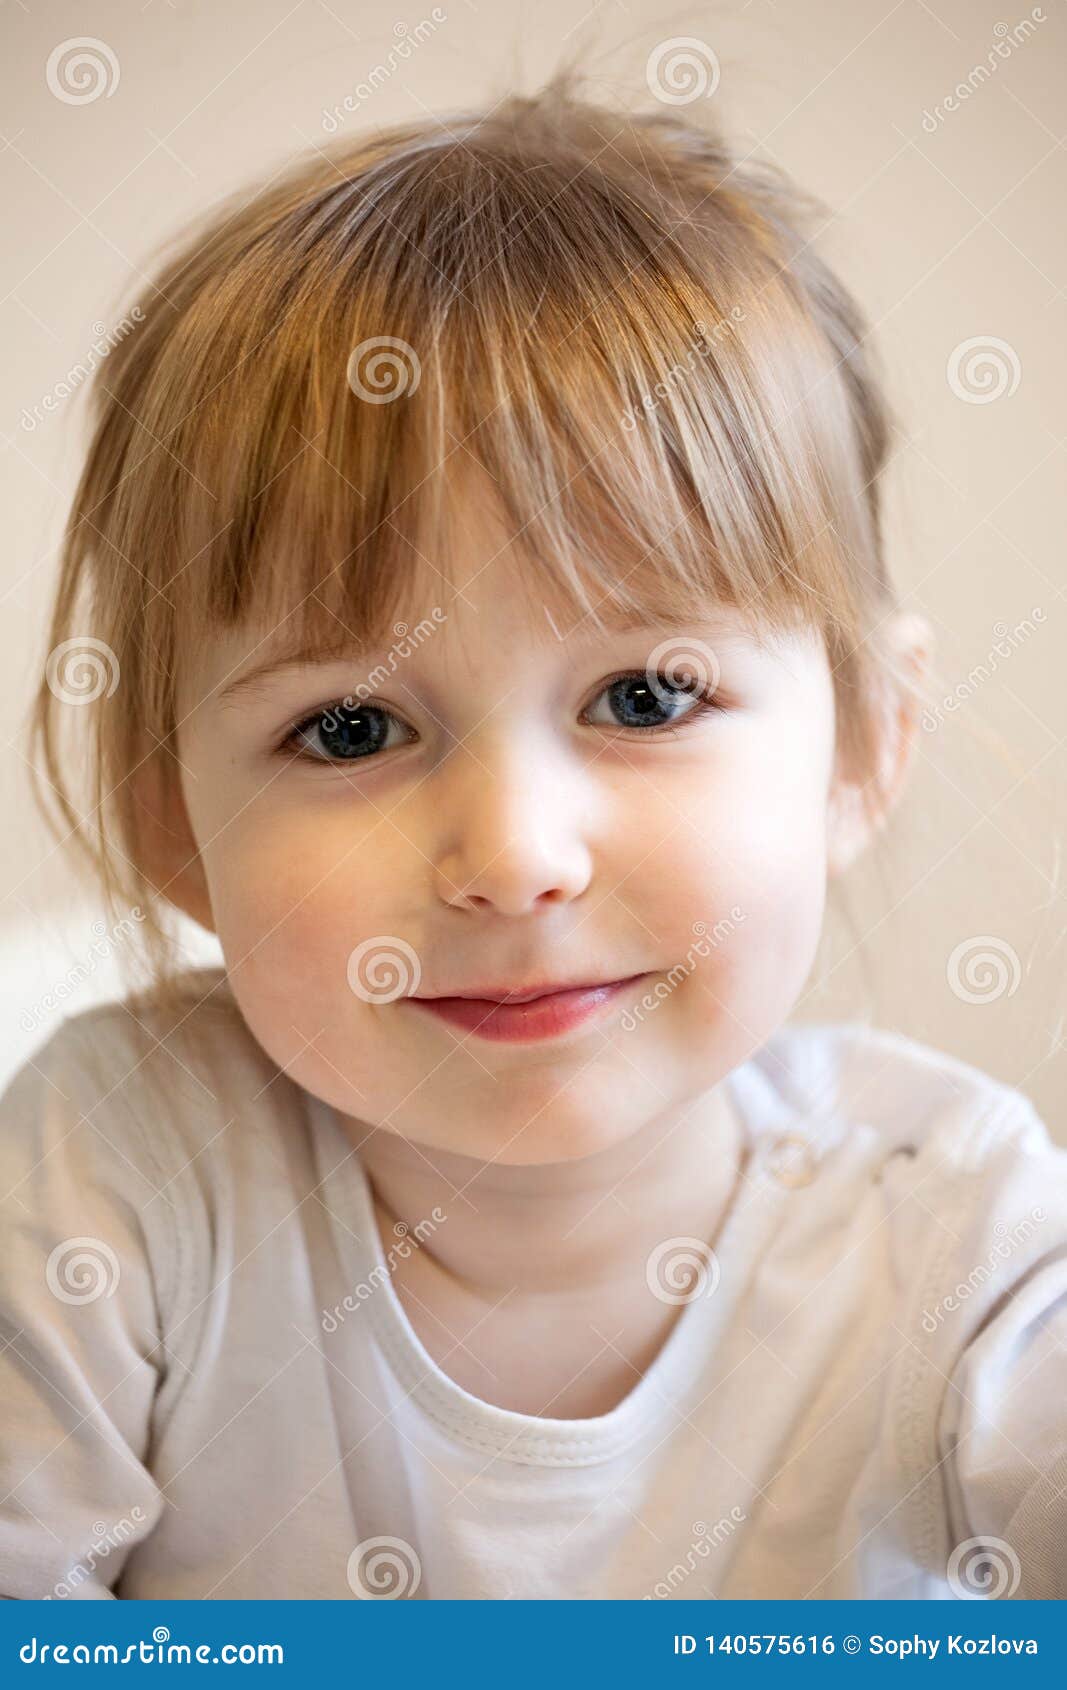 Cute Smiling Child Girl with Blonde Hair Stock Photo - Image of children,  small: 140575616